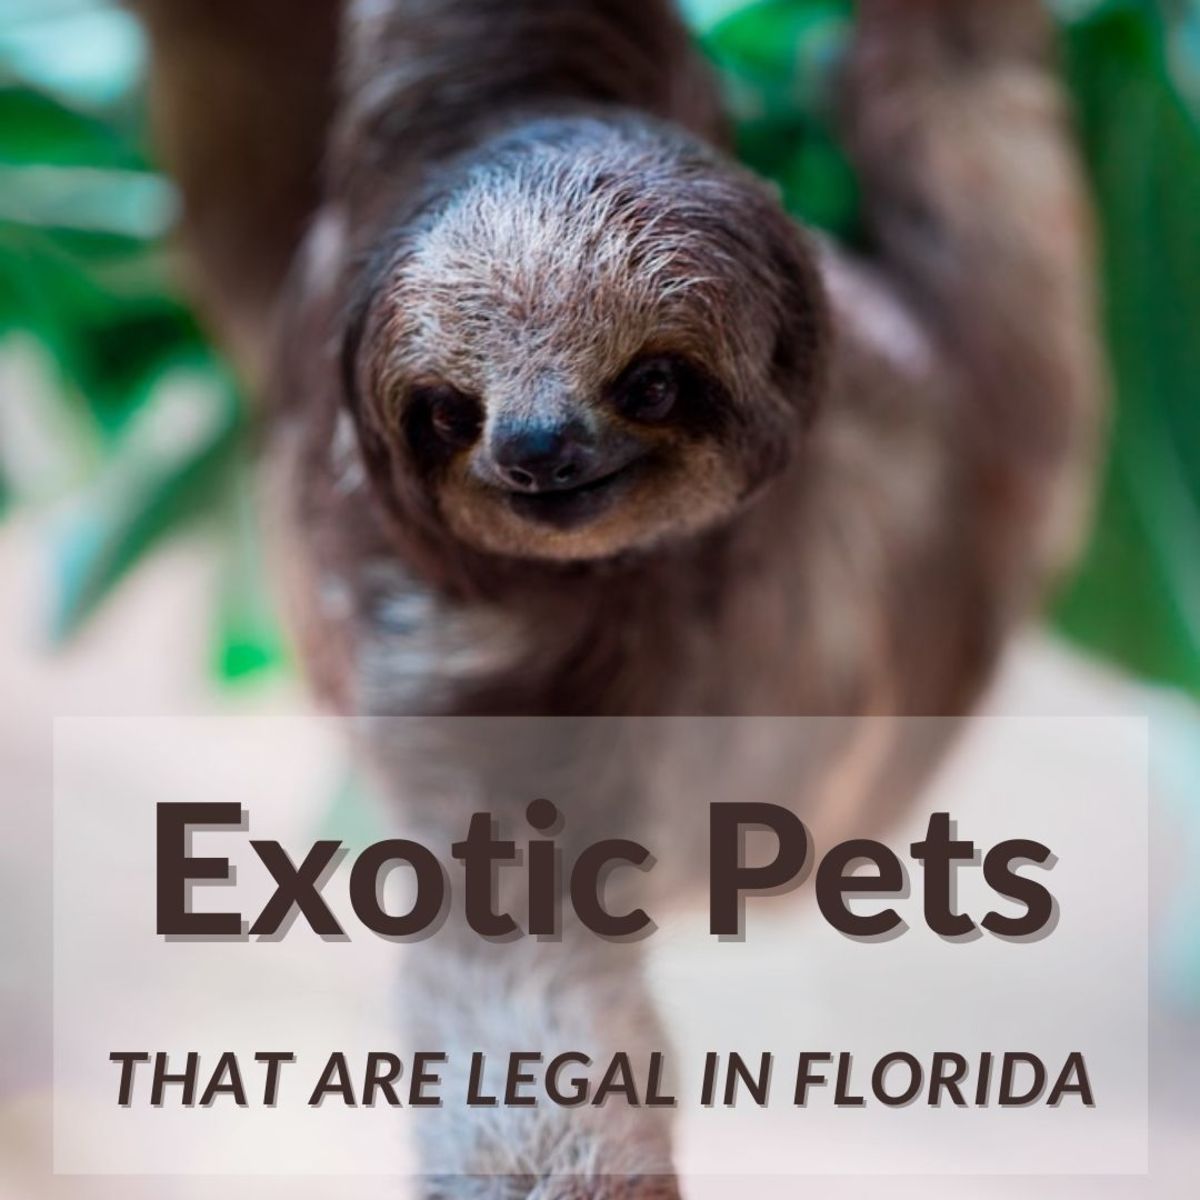 10 Exotic Pets That Are Legal in Florida - PetHelpful